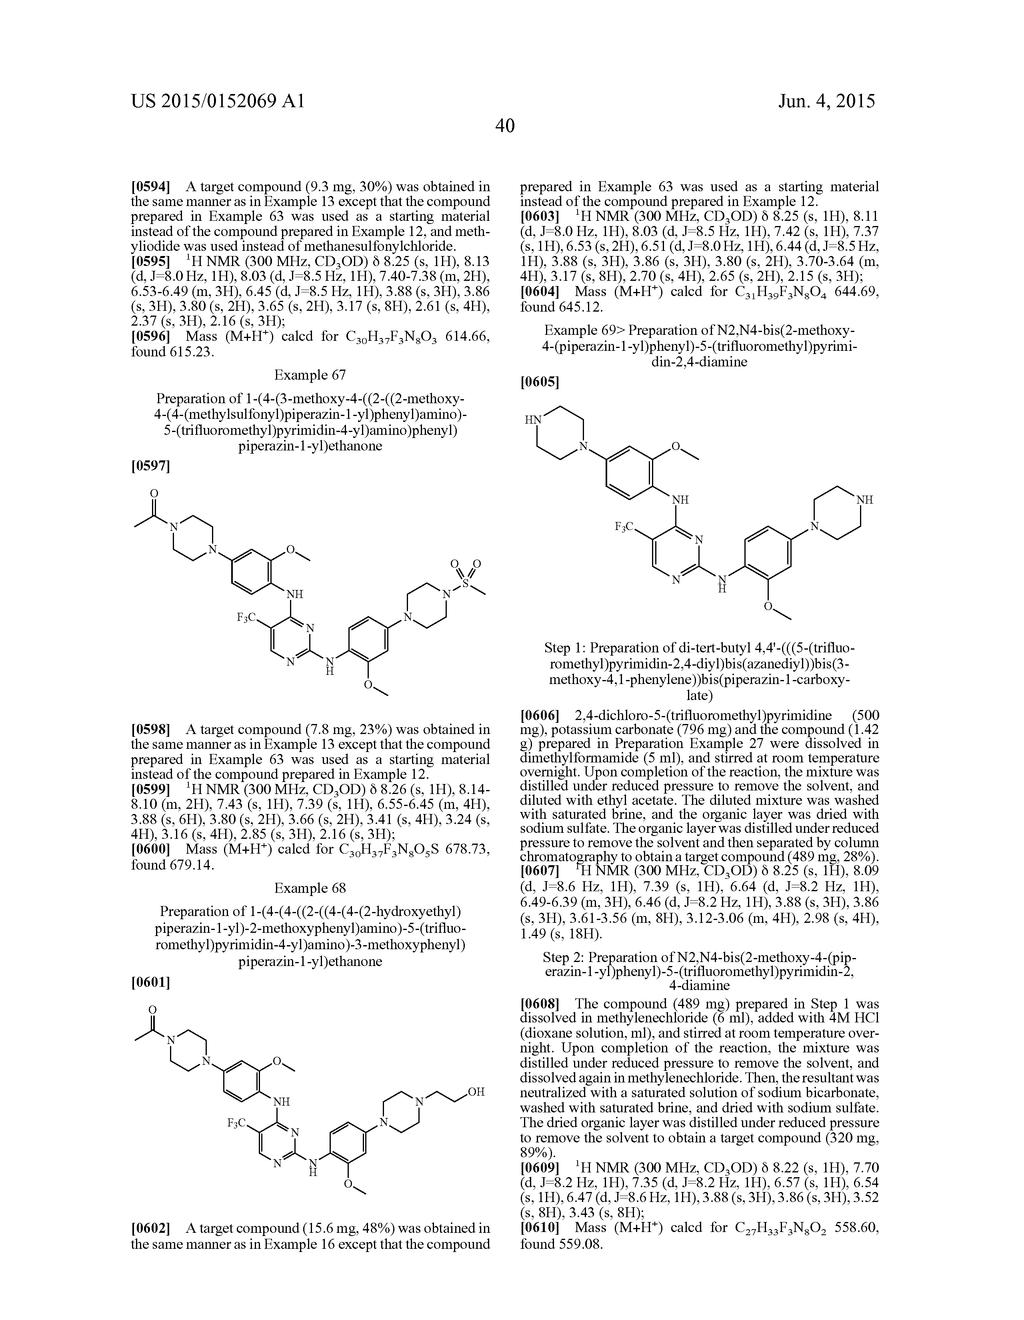 N2,N4-BIS(4-(PIPERAZINE-1-YL)PHENYL)PIRIMIDINE-2,4-DIAMINE DERIVATIVE OR     PHARMACEUTICALLY ACCEPTABLE SALT THEREOF, AND COMPOSITION CONTAINING SAME     AS ACTIVE INGREDIENT FOR PREVENTING OR TREATING CANCER - diagram, schematic, and image 44